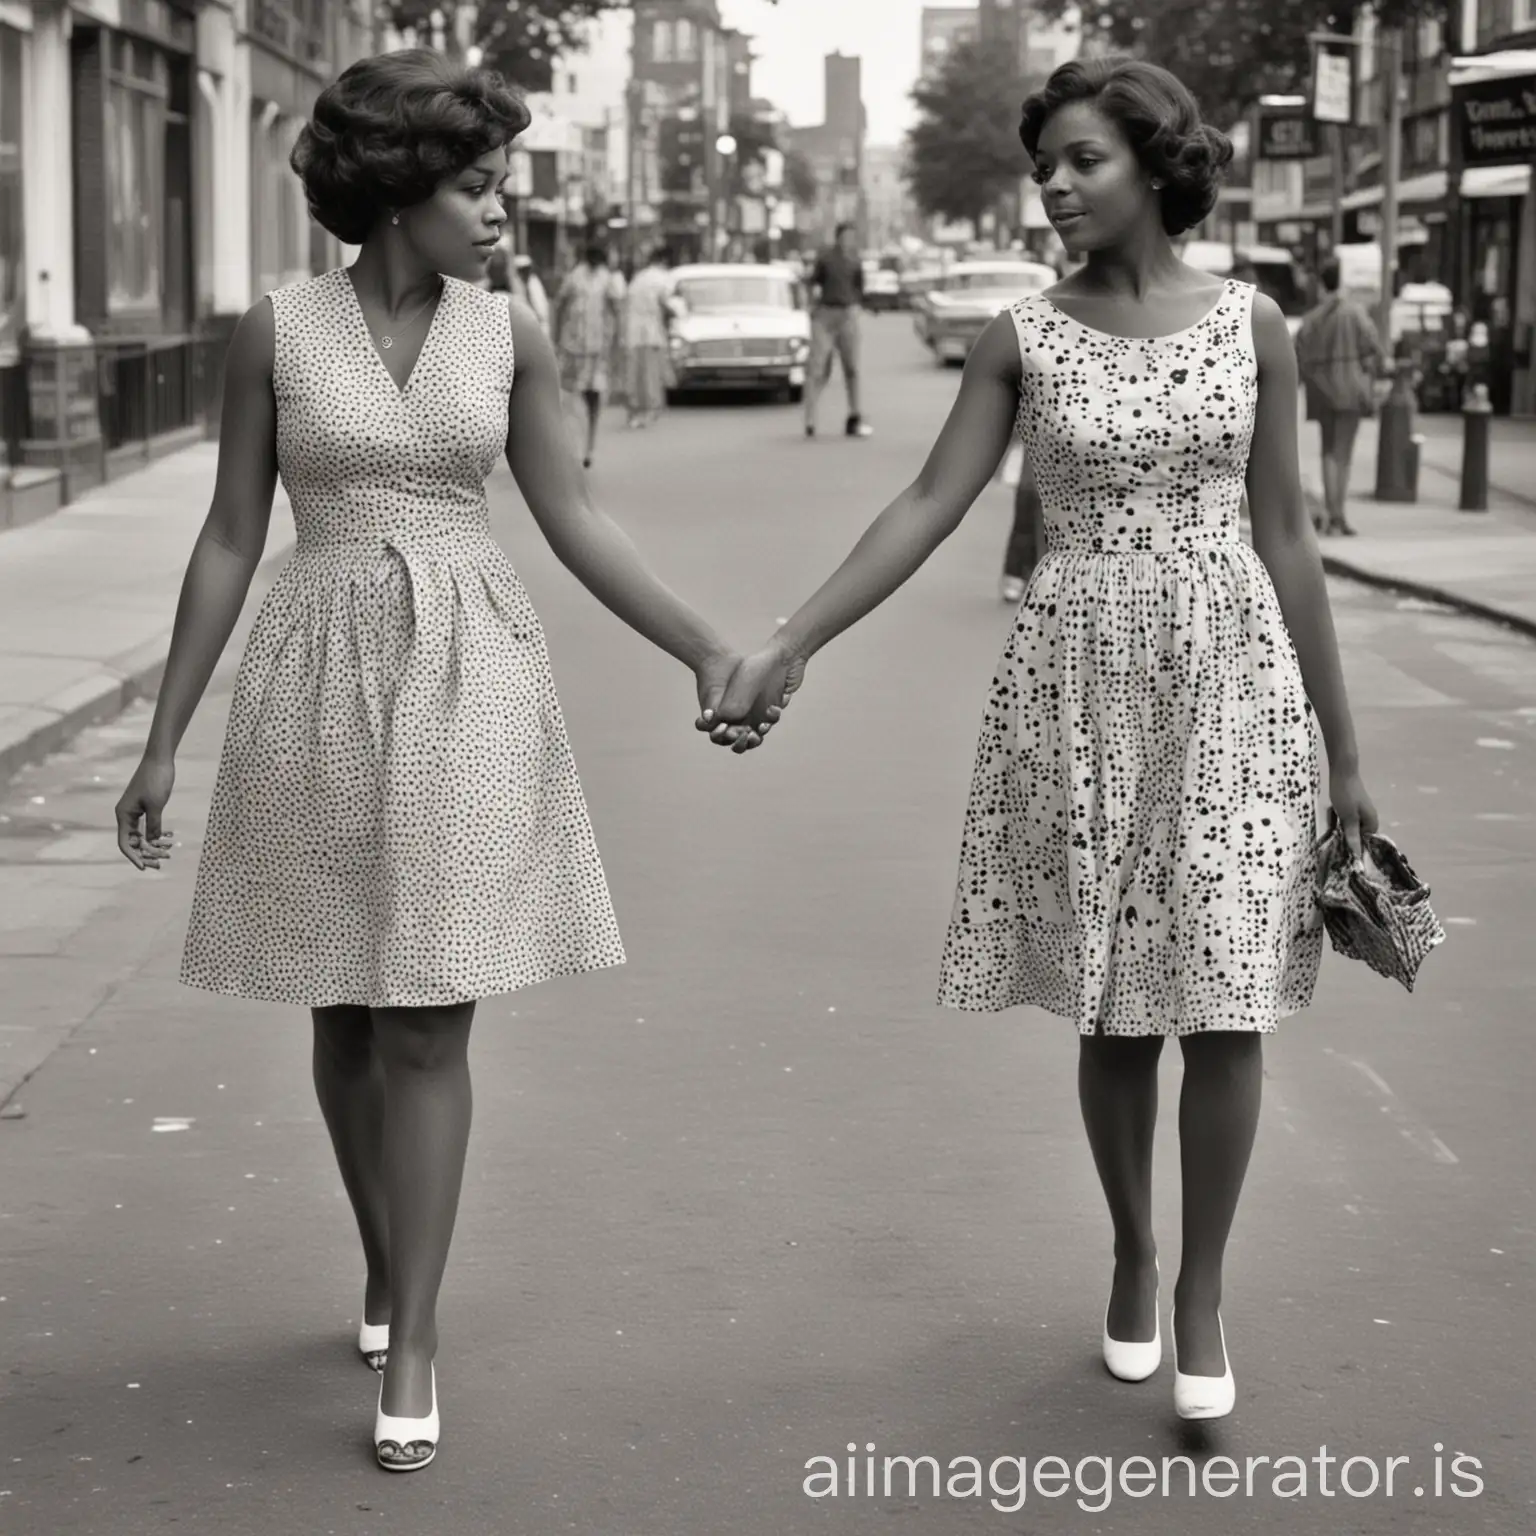 two different black mixed women holding hands in 1960s black and white picture wearing dress walking the street